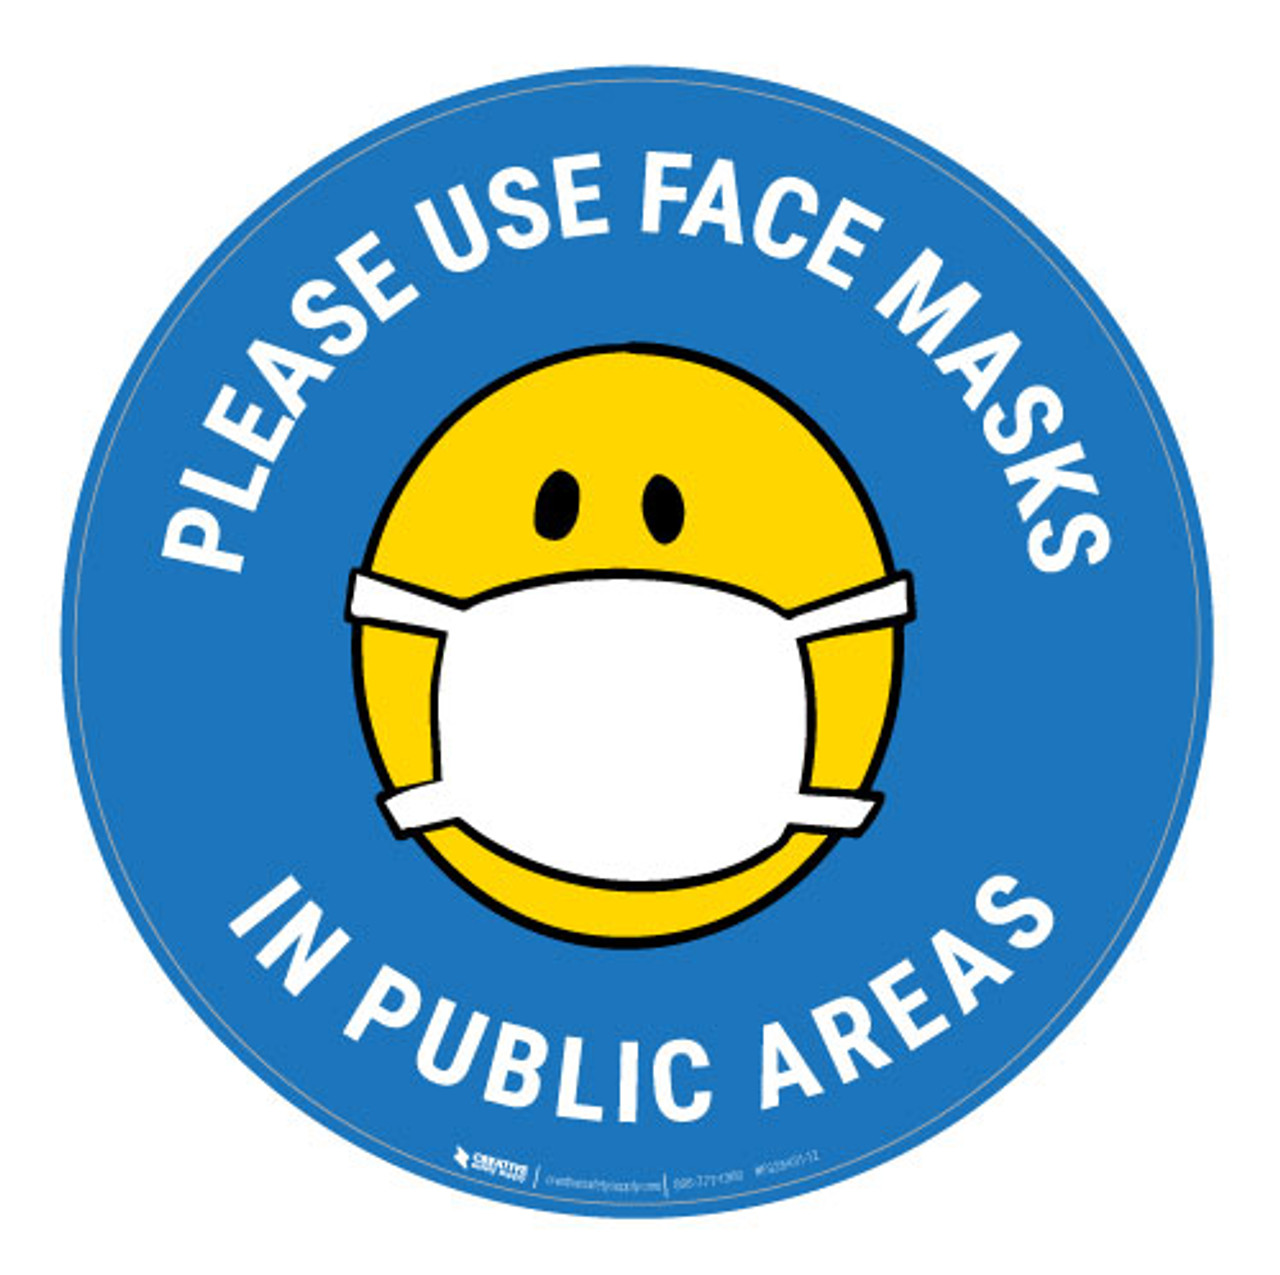 please-use-face-masks-in-public-areas-with-facemask-emoji-light-blue